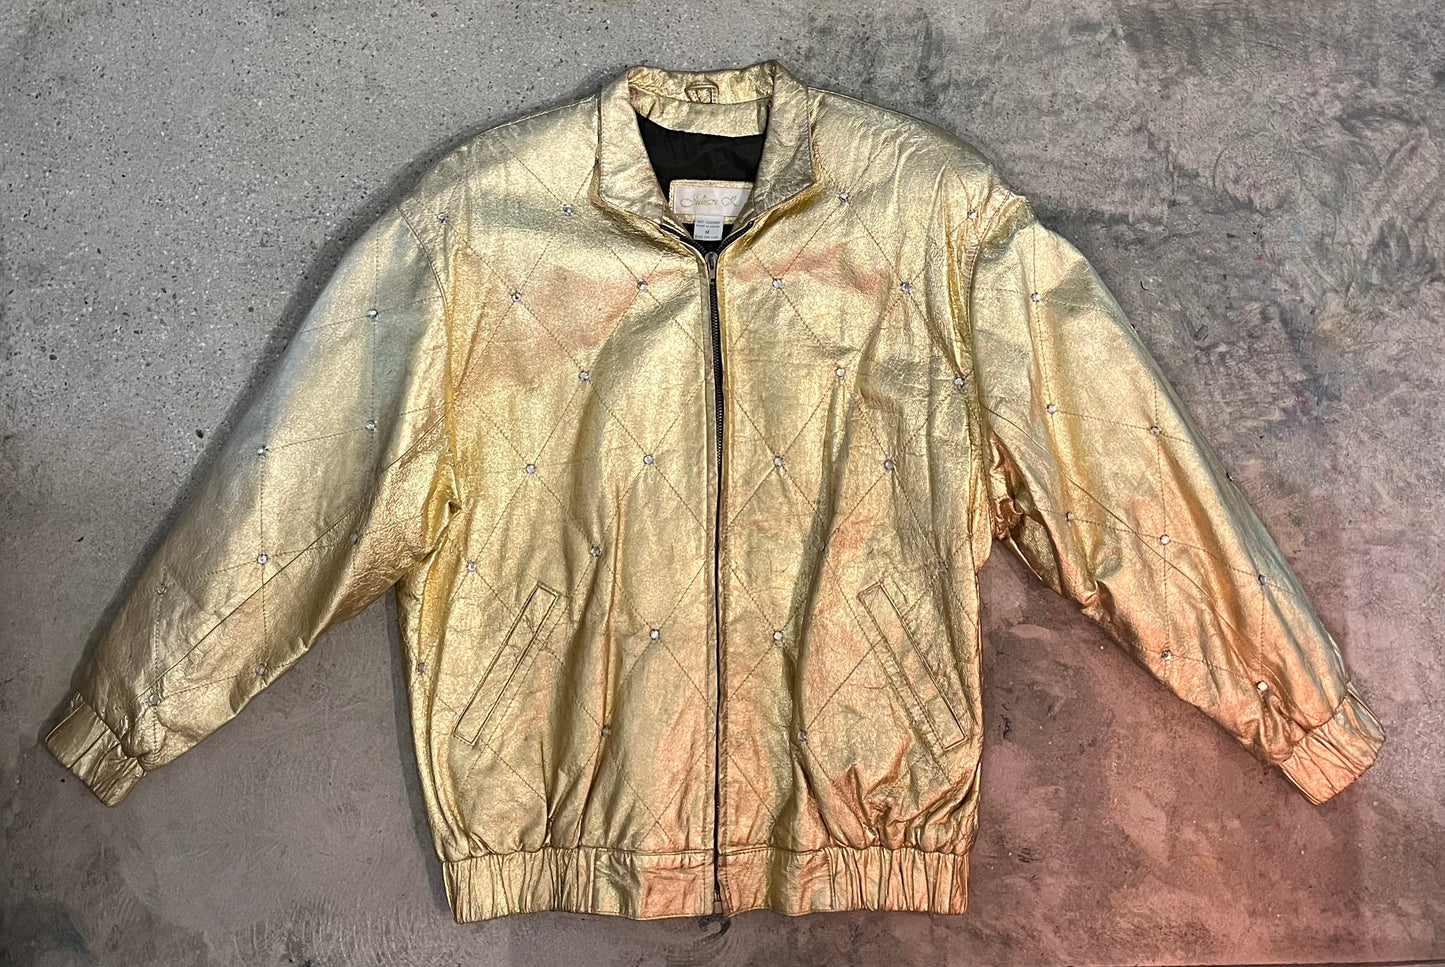 Gold Leather, Harlequin Diamond Jacket with Crystals